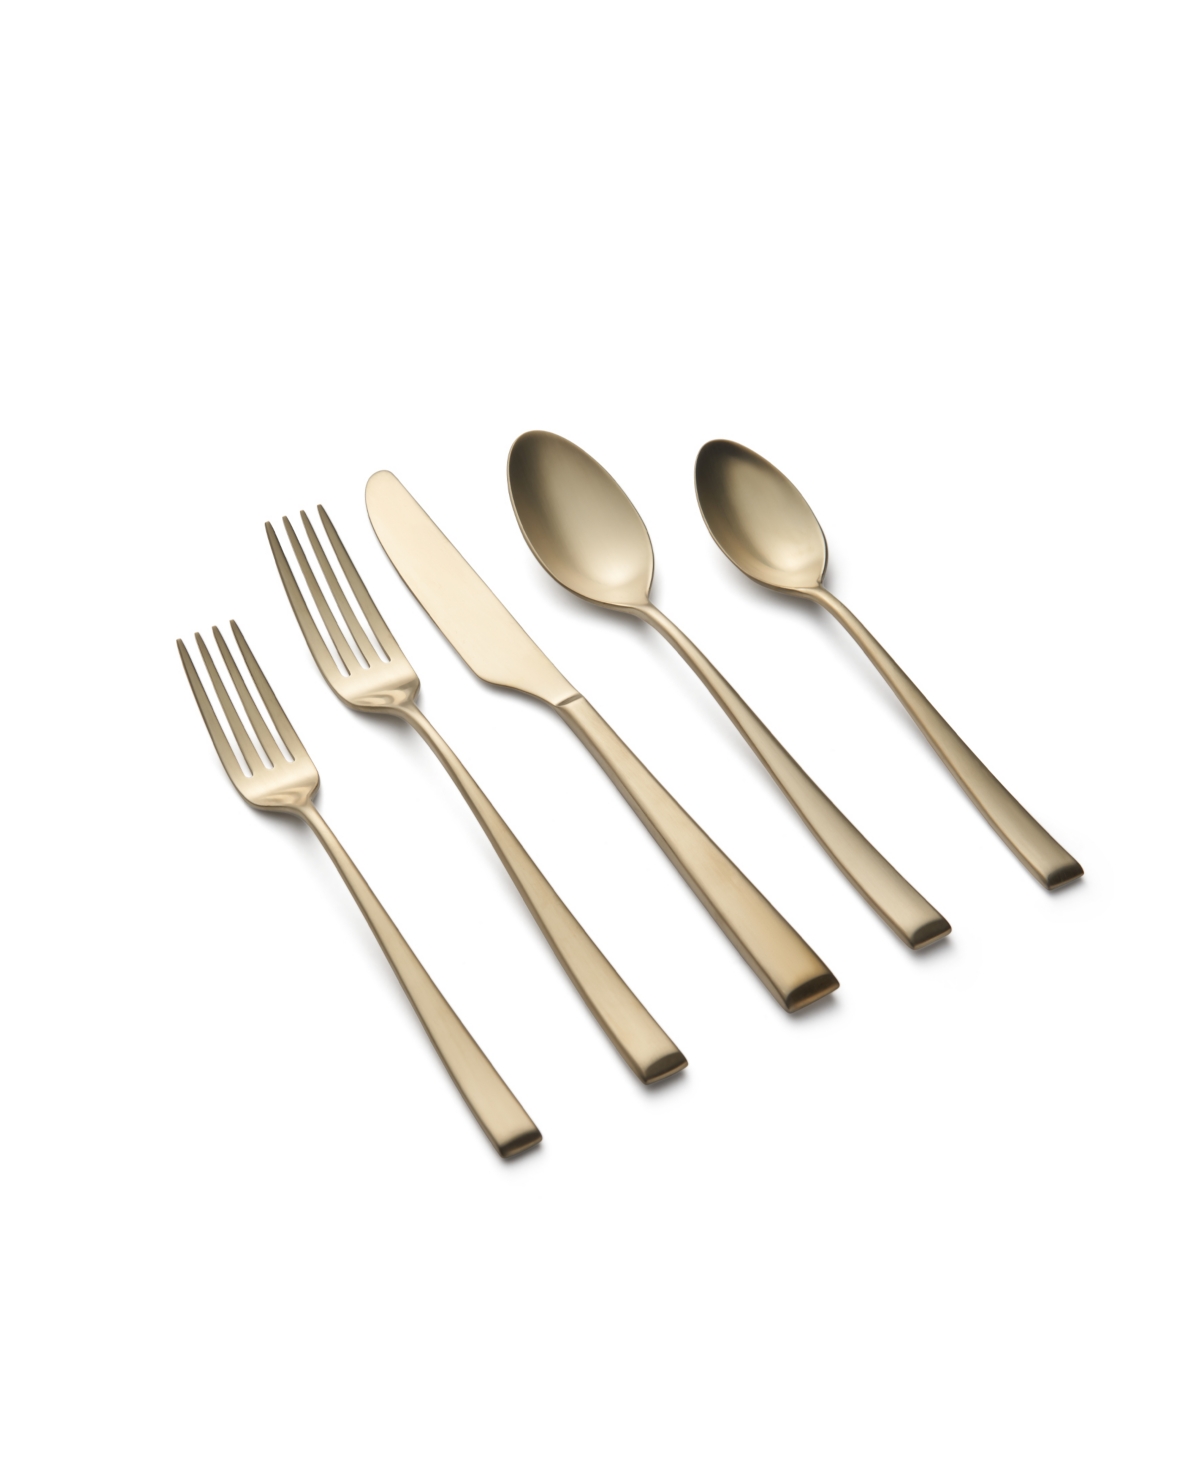 Cambridge Silversmiths Marlise Champagne Satin 20 Piece 18/10 Stainless Steel Flatware Set, Service for 4